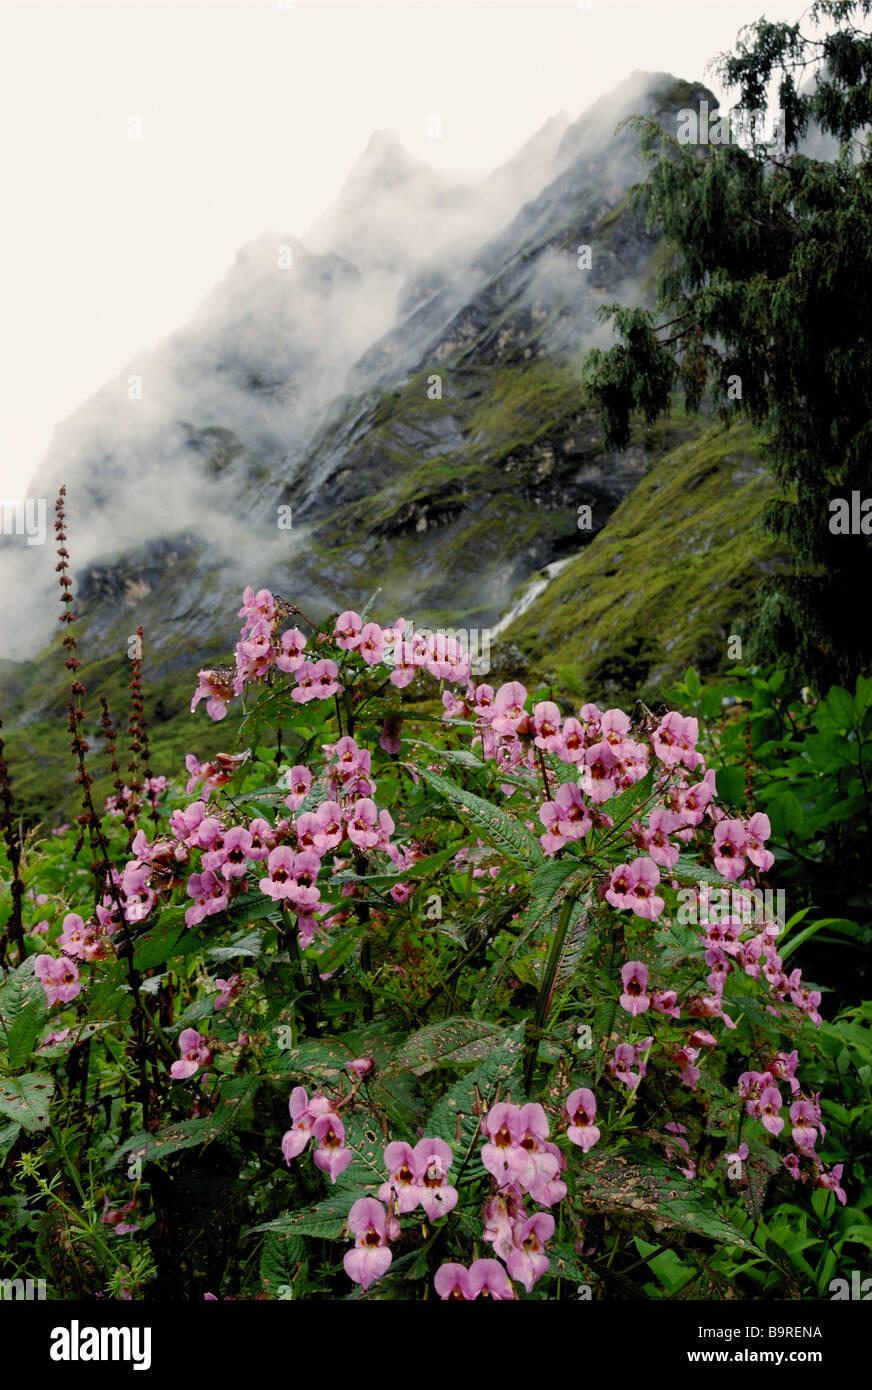 Impatiens glandulifera grows profusely during the monsoon, Rolwaling Valley at about 4000 m elevation, Nepal Stock Photo